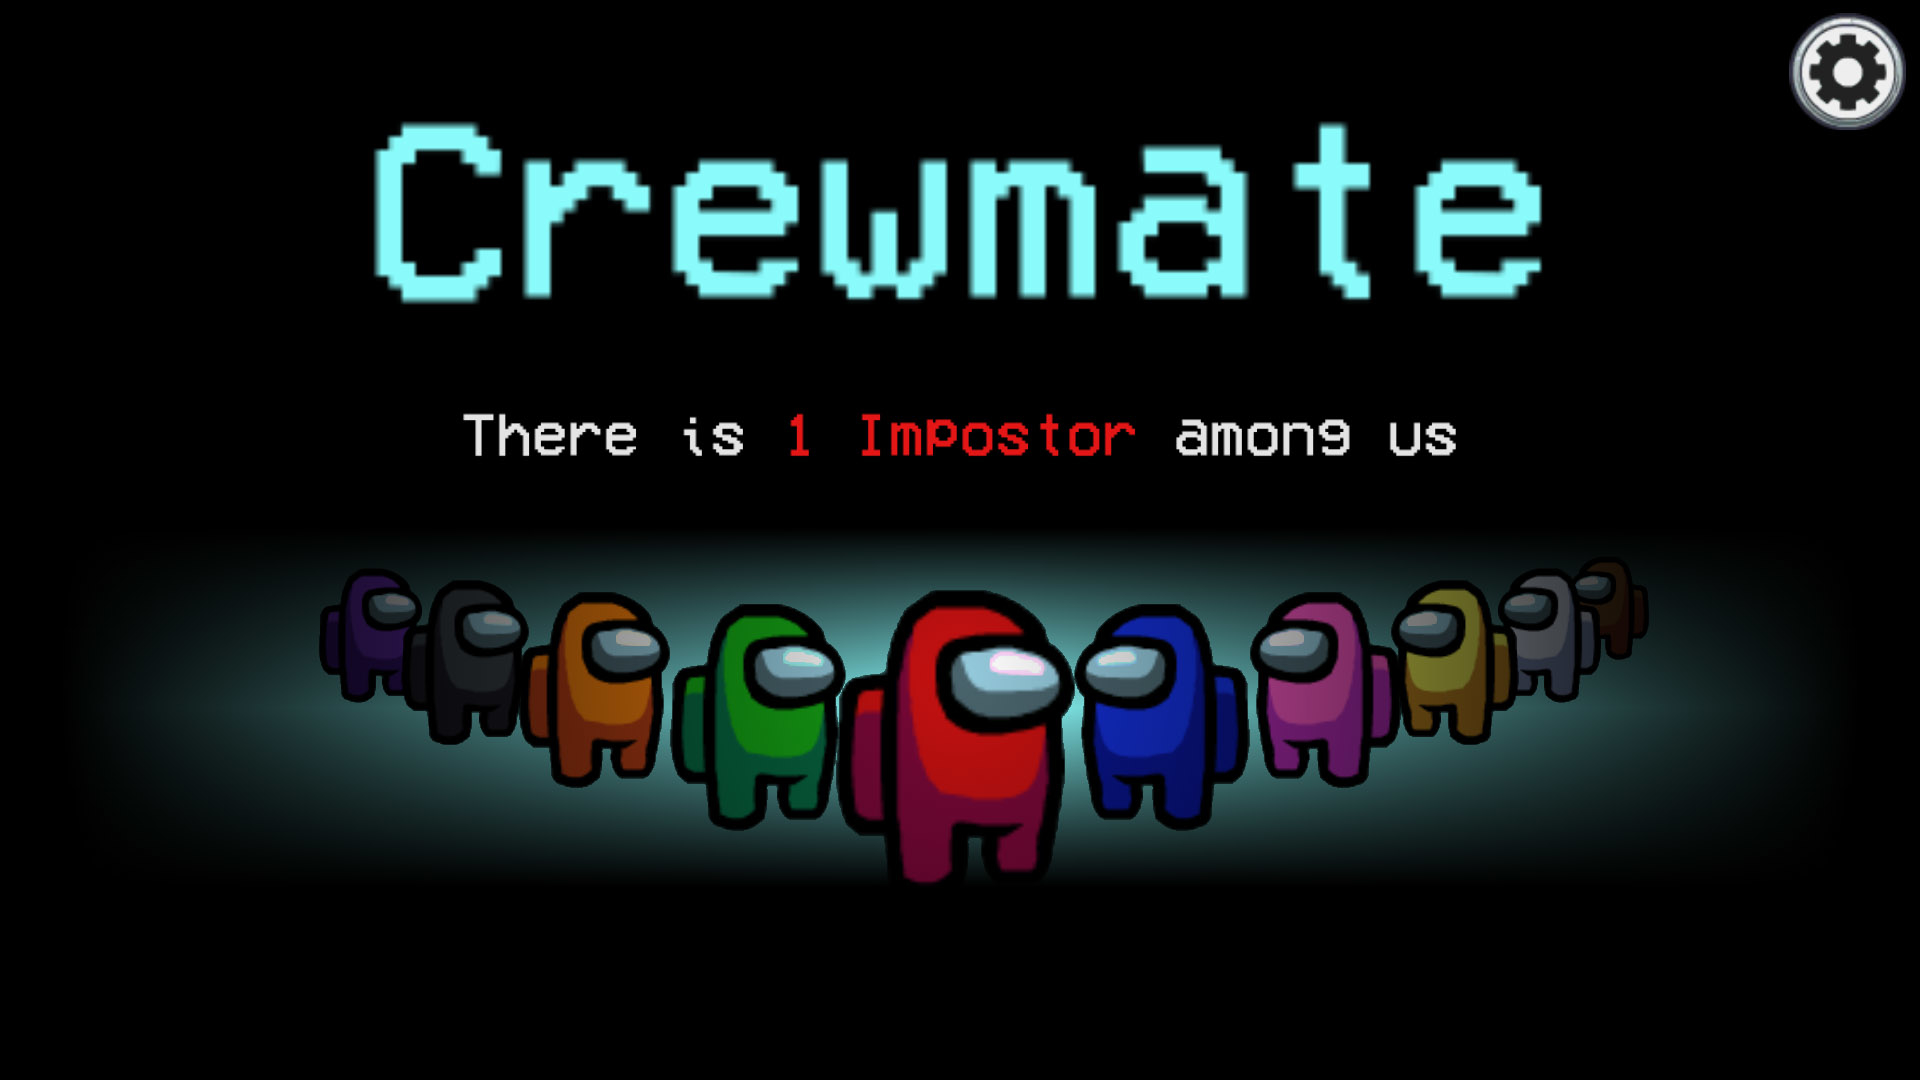 There is 1 Imposter Crewmate Among Us Wallpaper, HD Games 4K Wallpaper, Image, Photo and Background